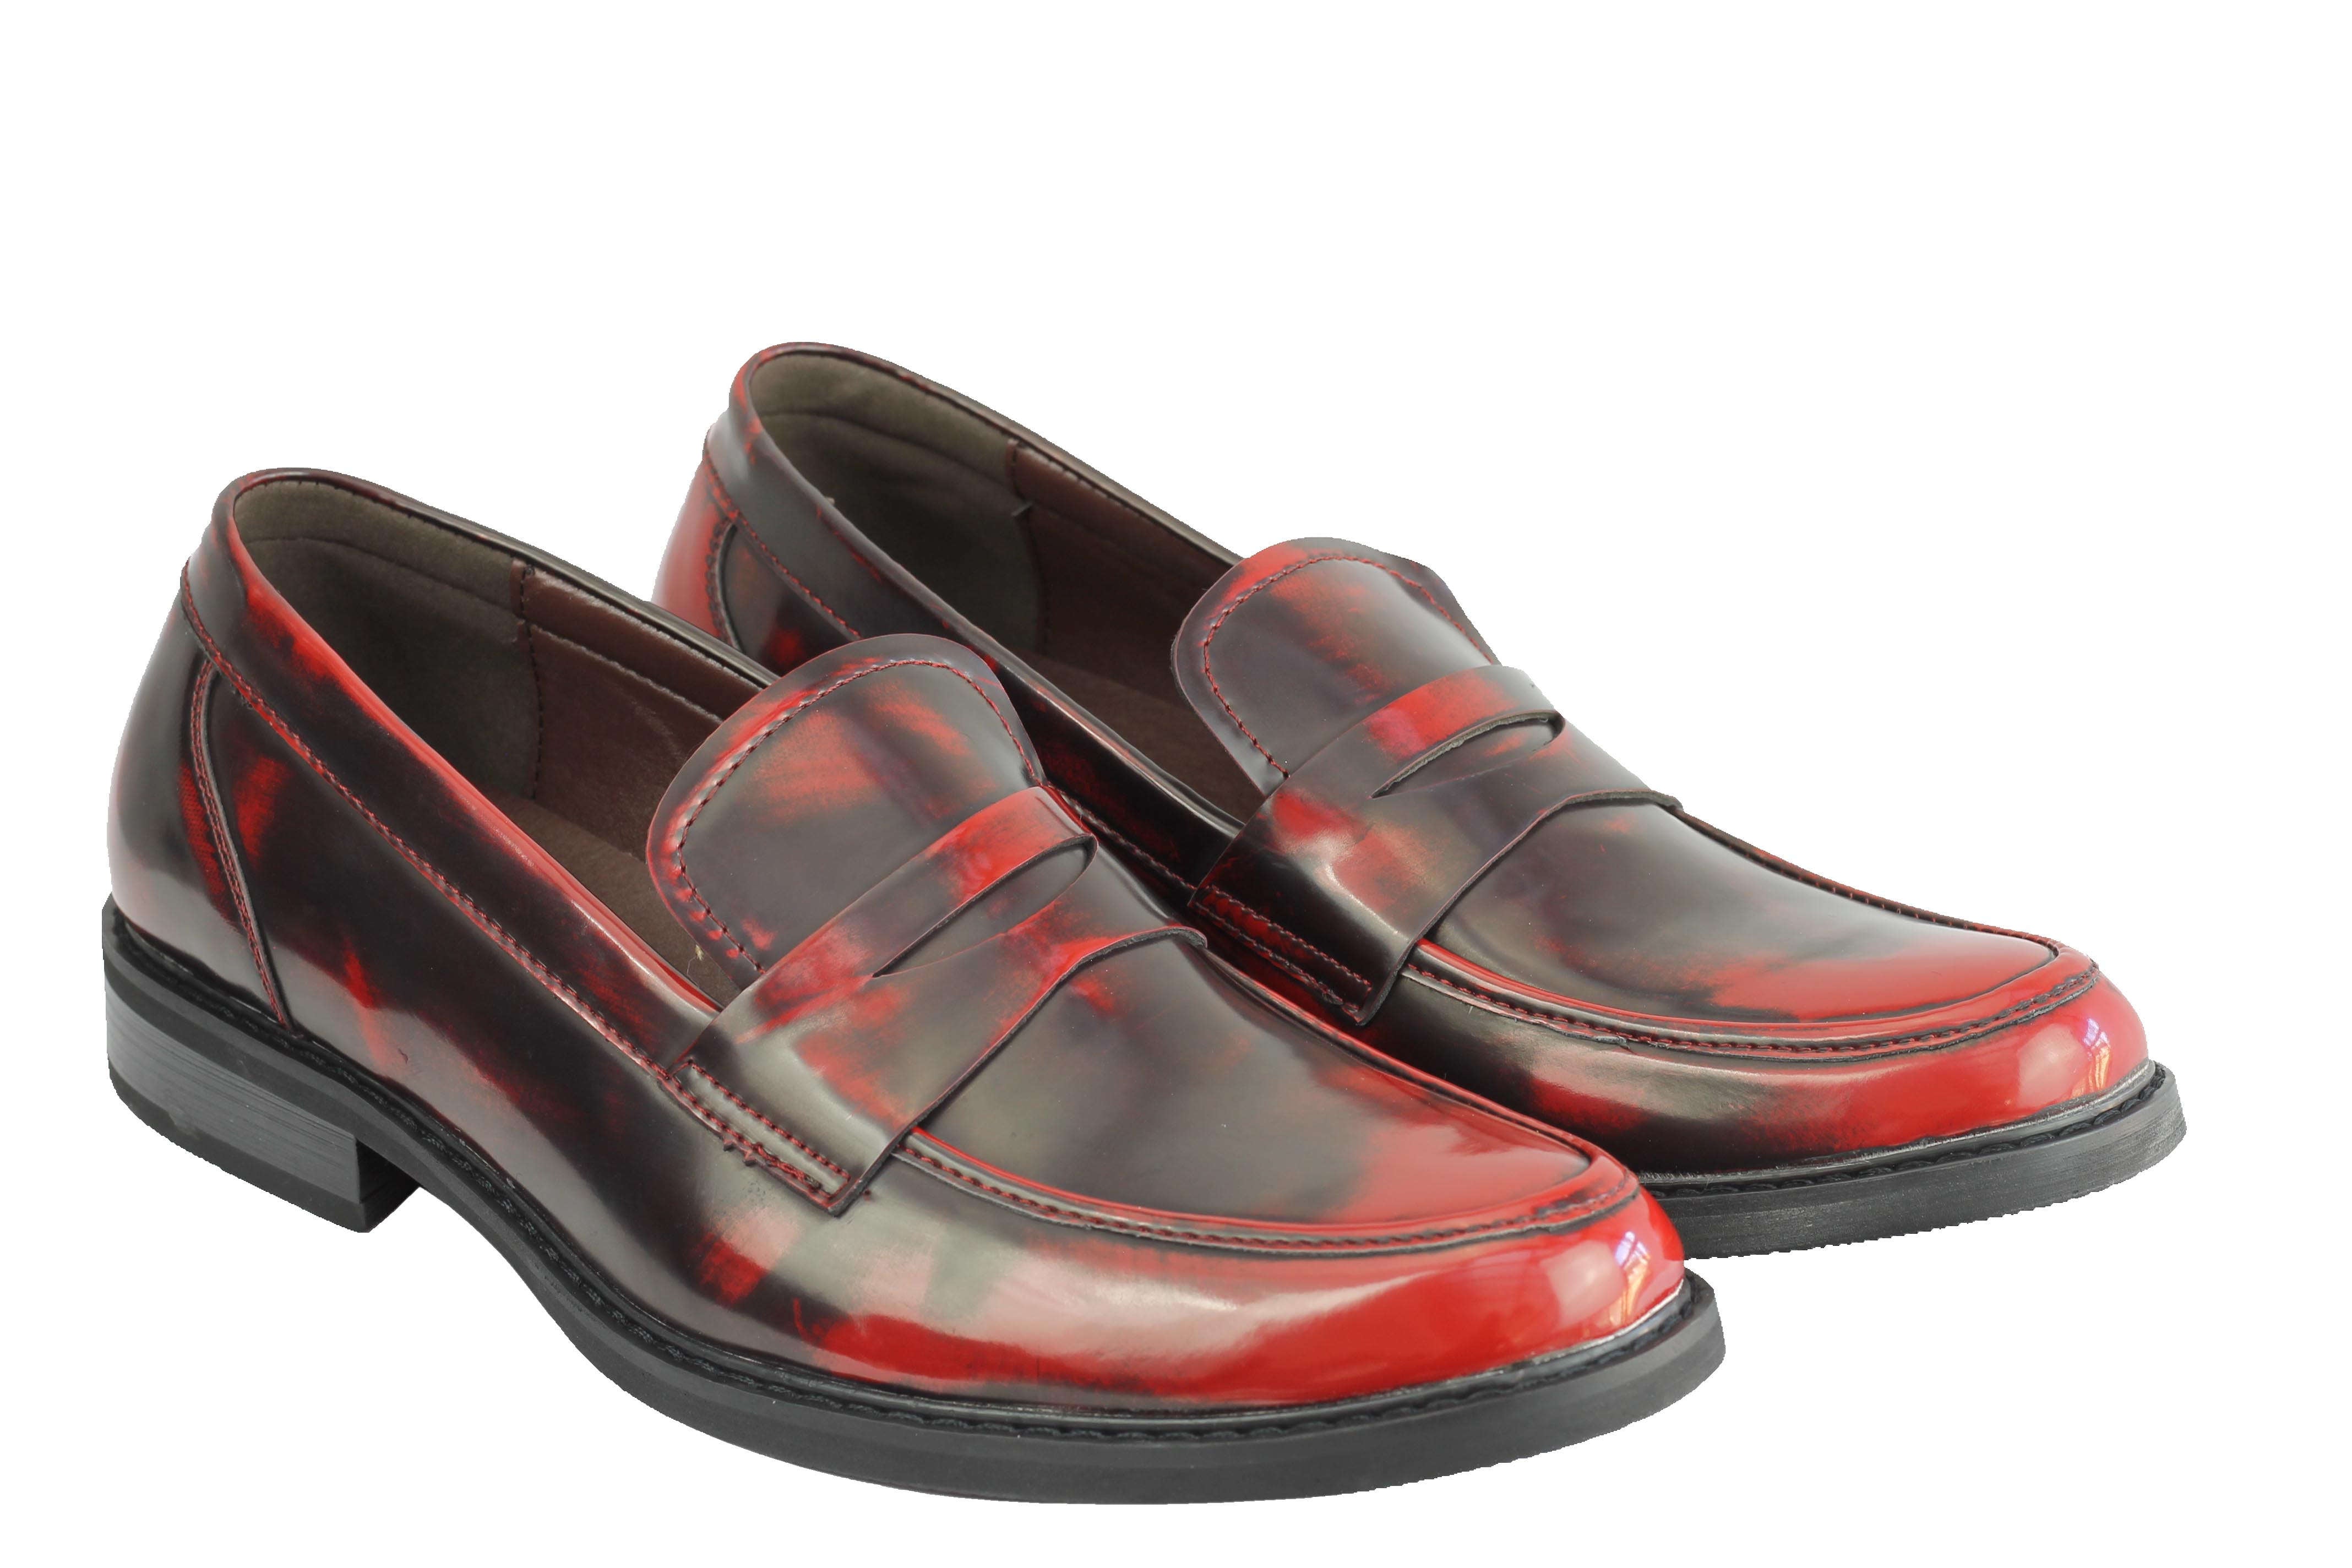 Retro Polished Leather Loafers In Maroon